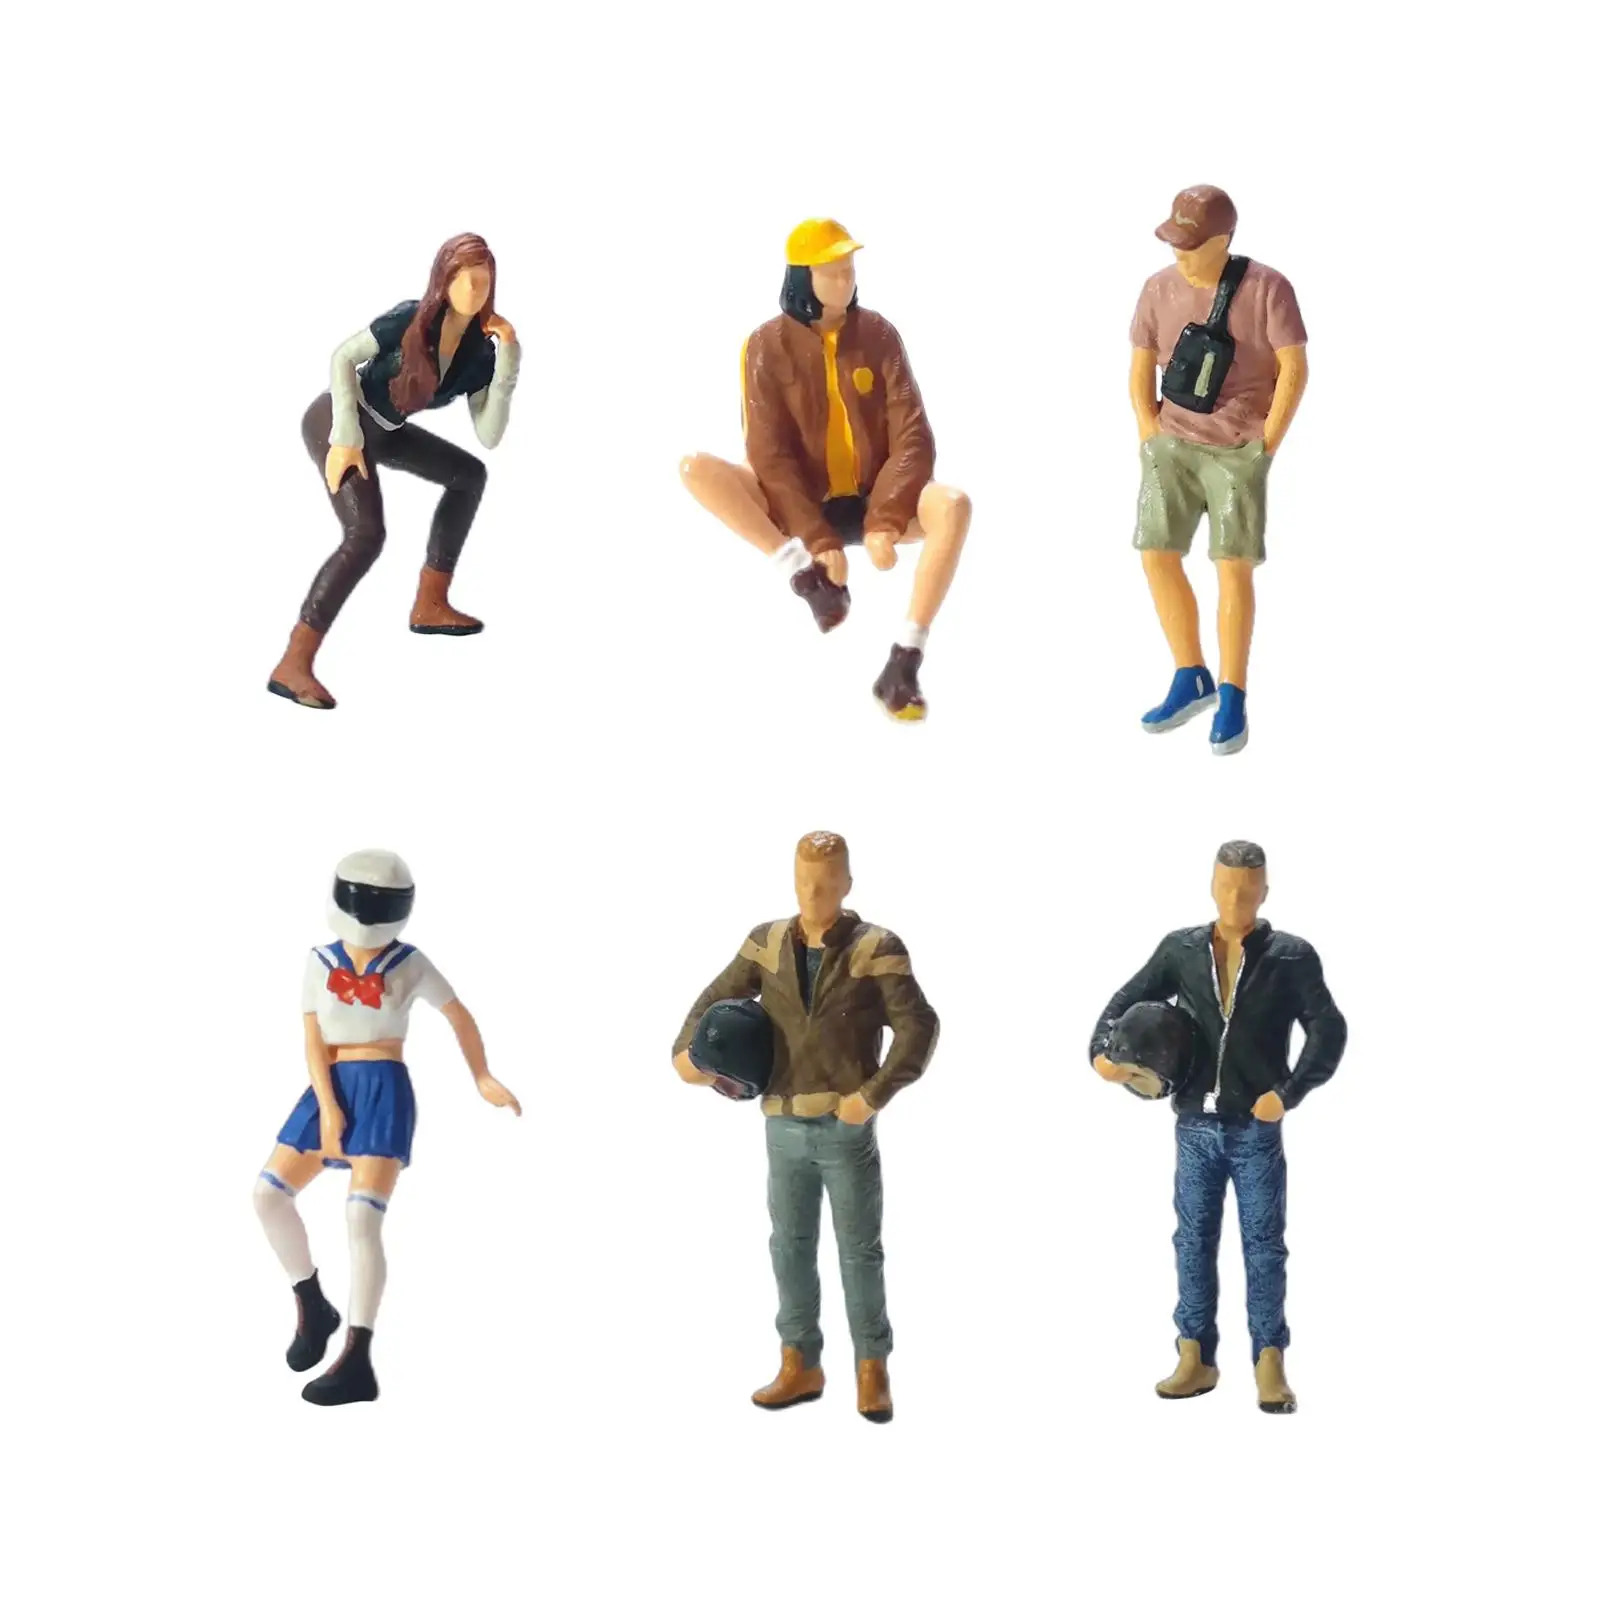 Resin 1/64 Figures Realistic Figures Trains Architectural Painted Figures 1/64 Scale Figures Sand Table Layout Decoration